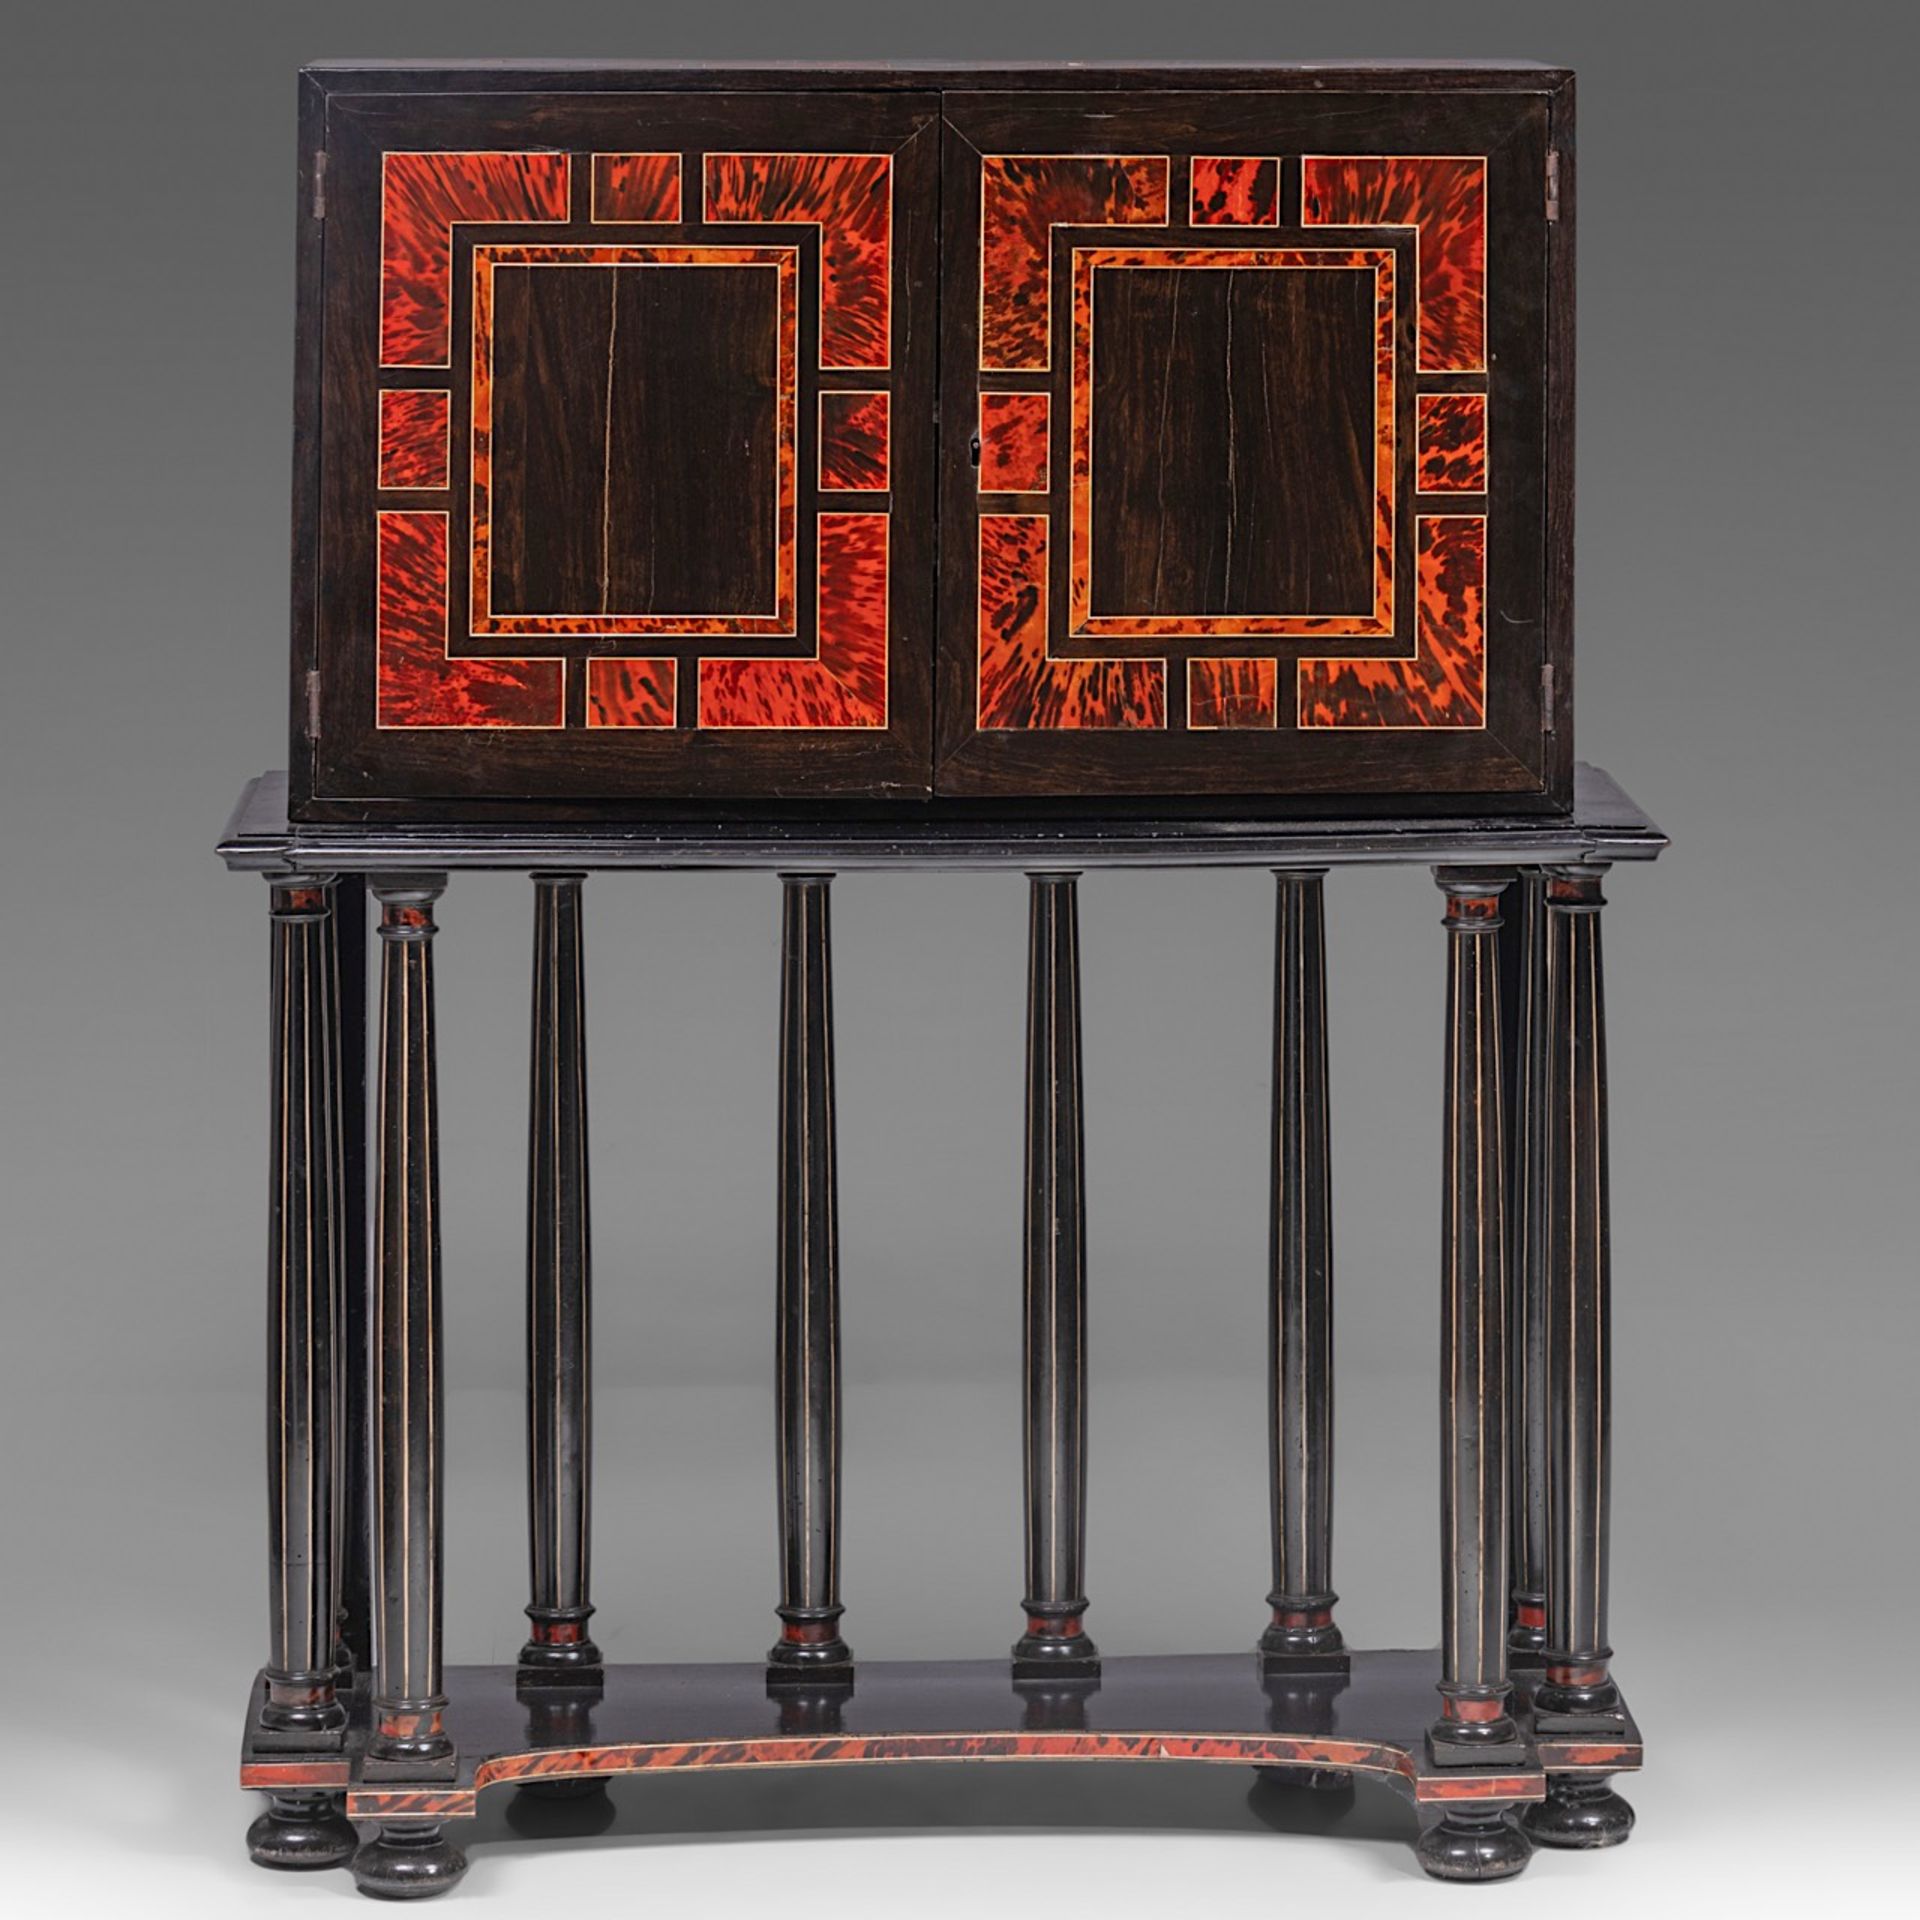 A 17thC Flemish Antwerp ebony, ivory and tortoiseshell cabinet-on-stand, H 137 cm (total) (+) - Image 4 of 9